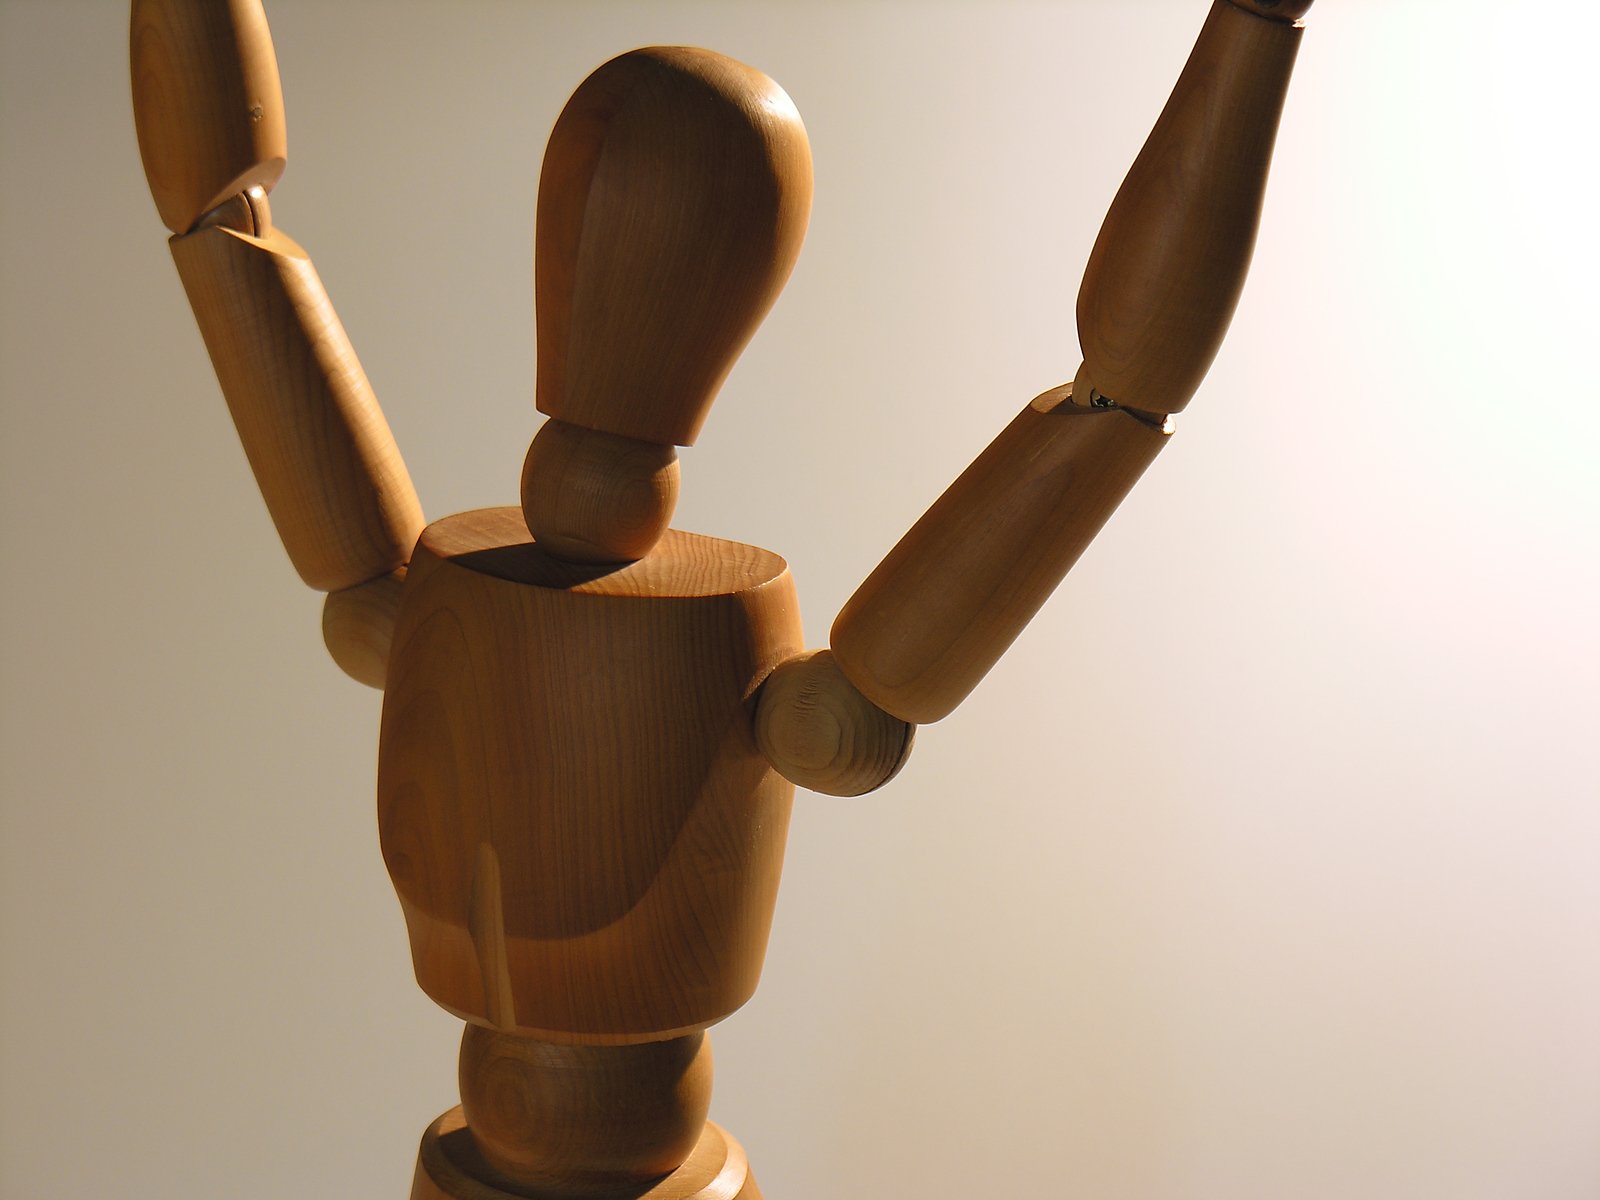 a wooden sculpture of a person with two hands up in the air